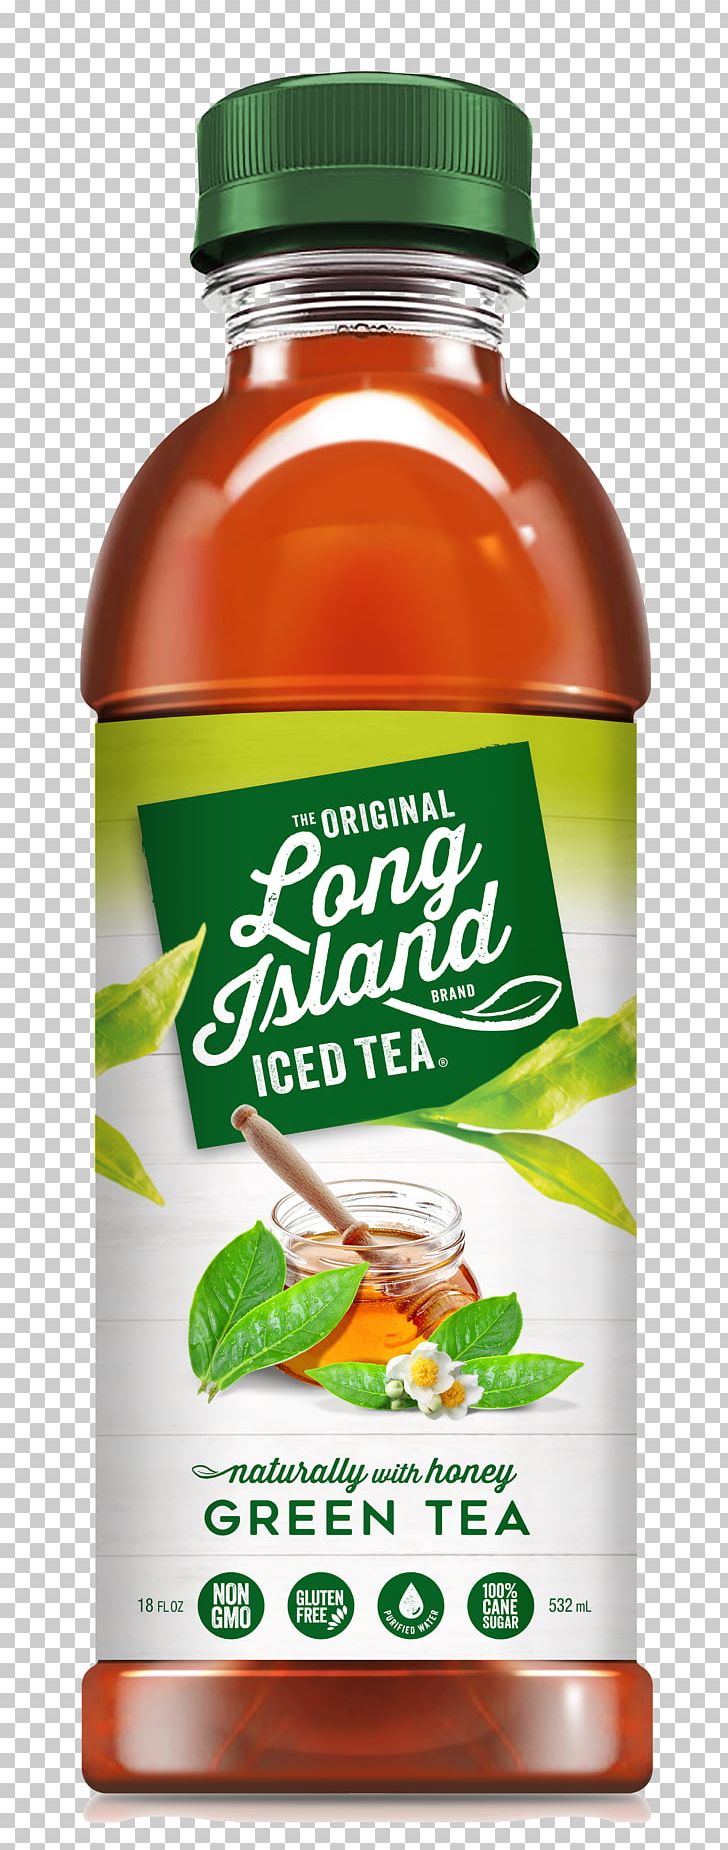 Long Island Iced Tea Lemonade PNG, Clipart, Beverage Industry, Bottle, Company, Condiment, Drink Free PNG Download